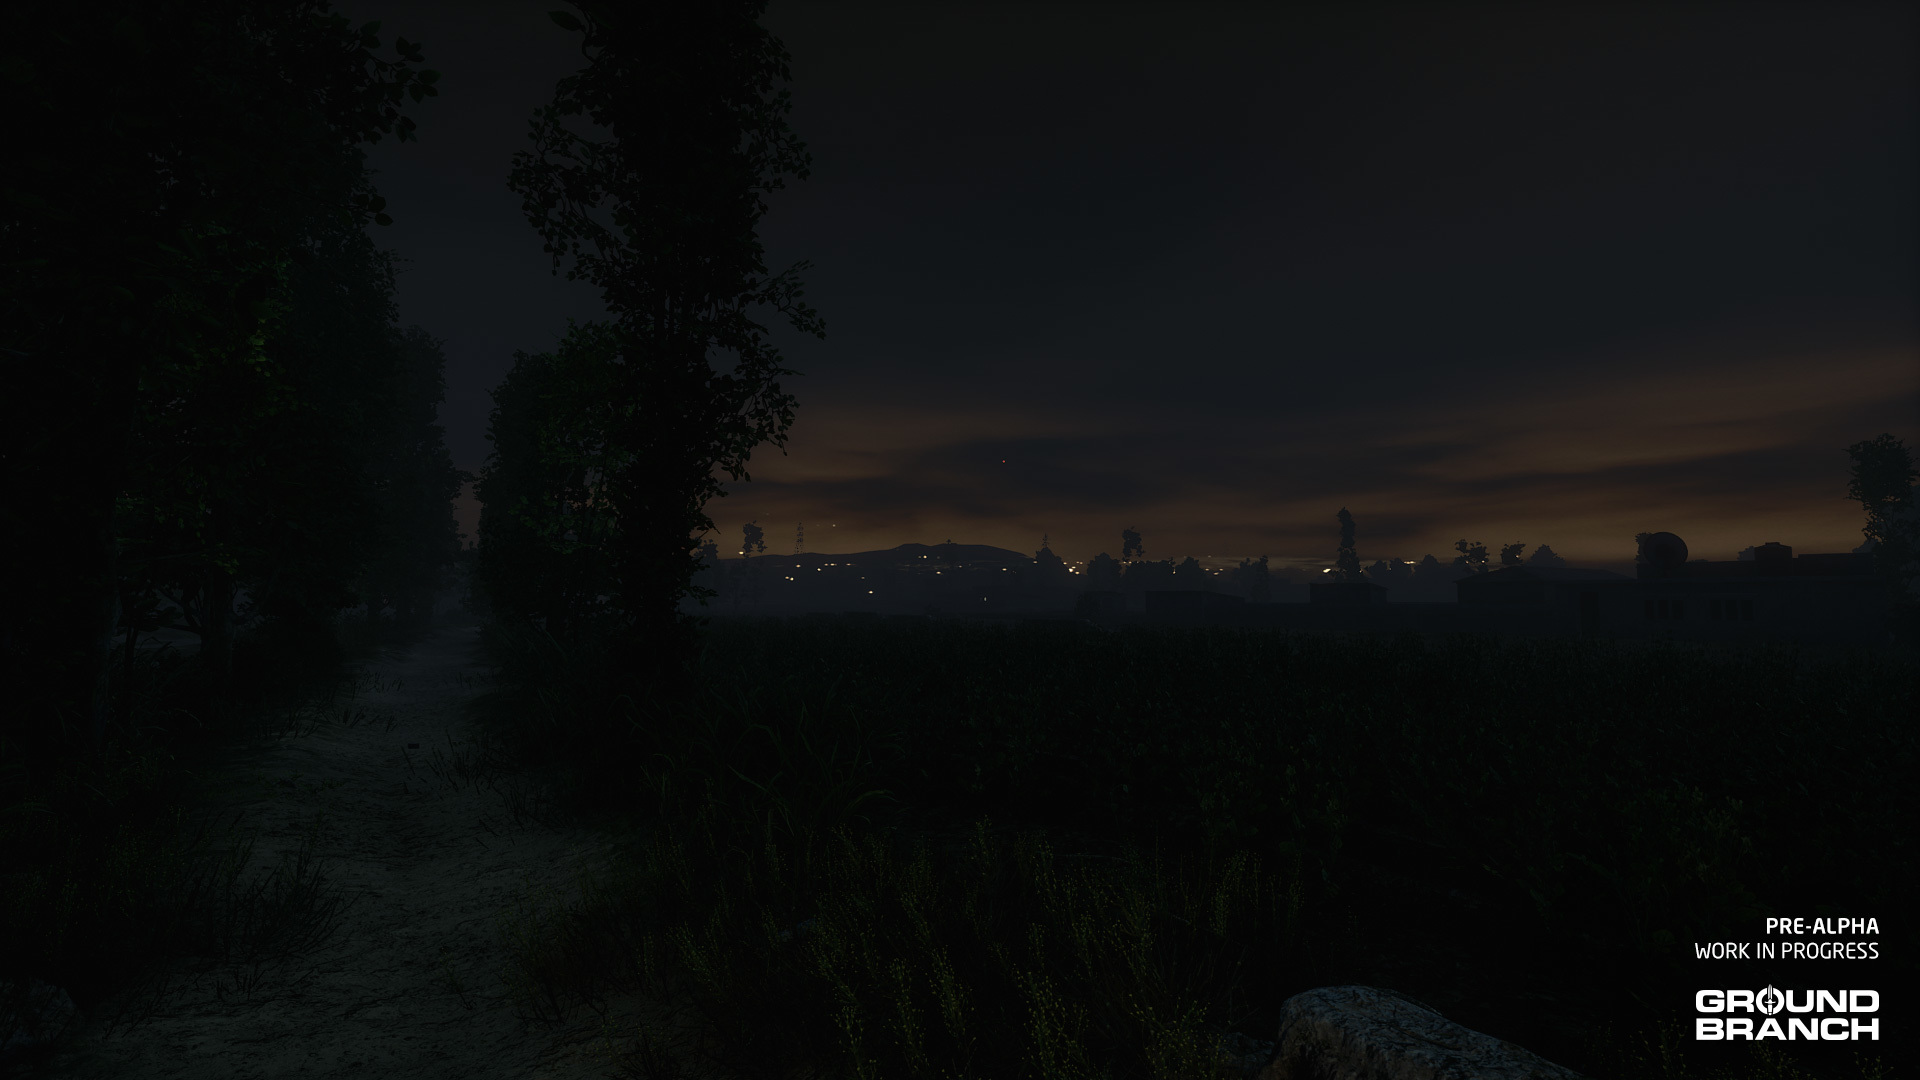 Escape from Tarkov dev diary: mo-cap, weapons, military advisers shrouded  in darkness